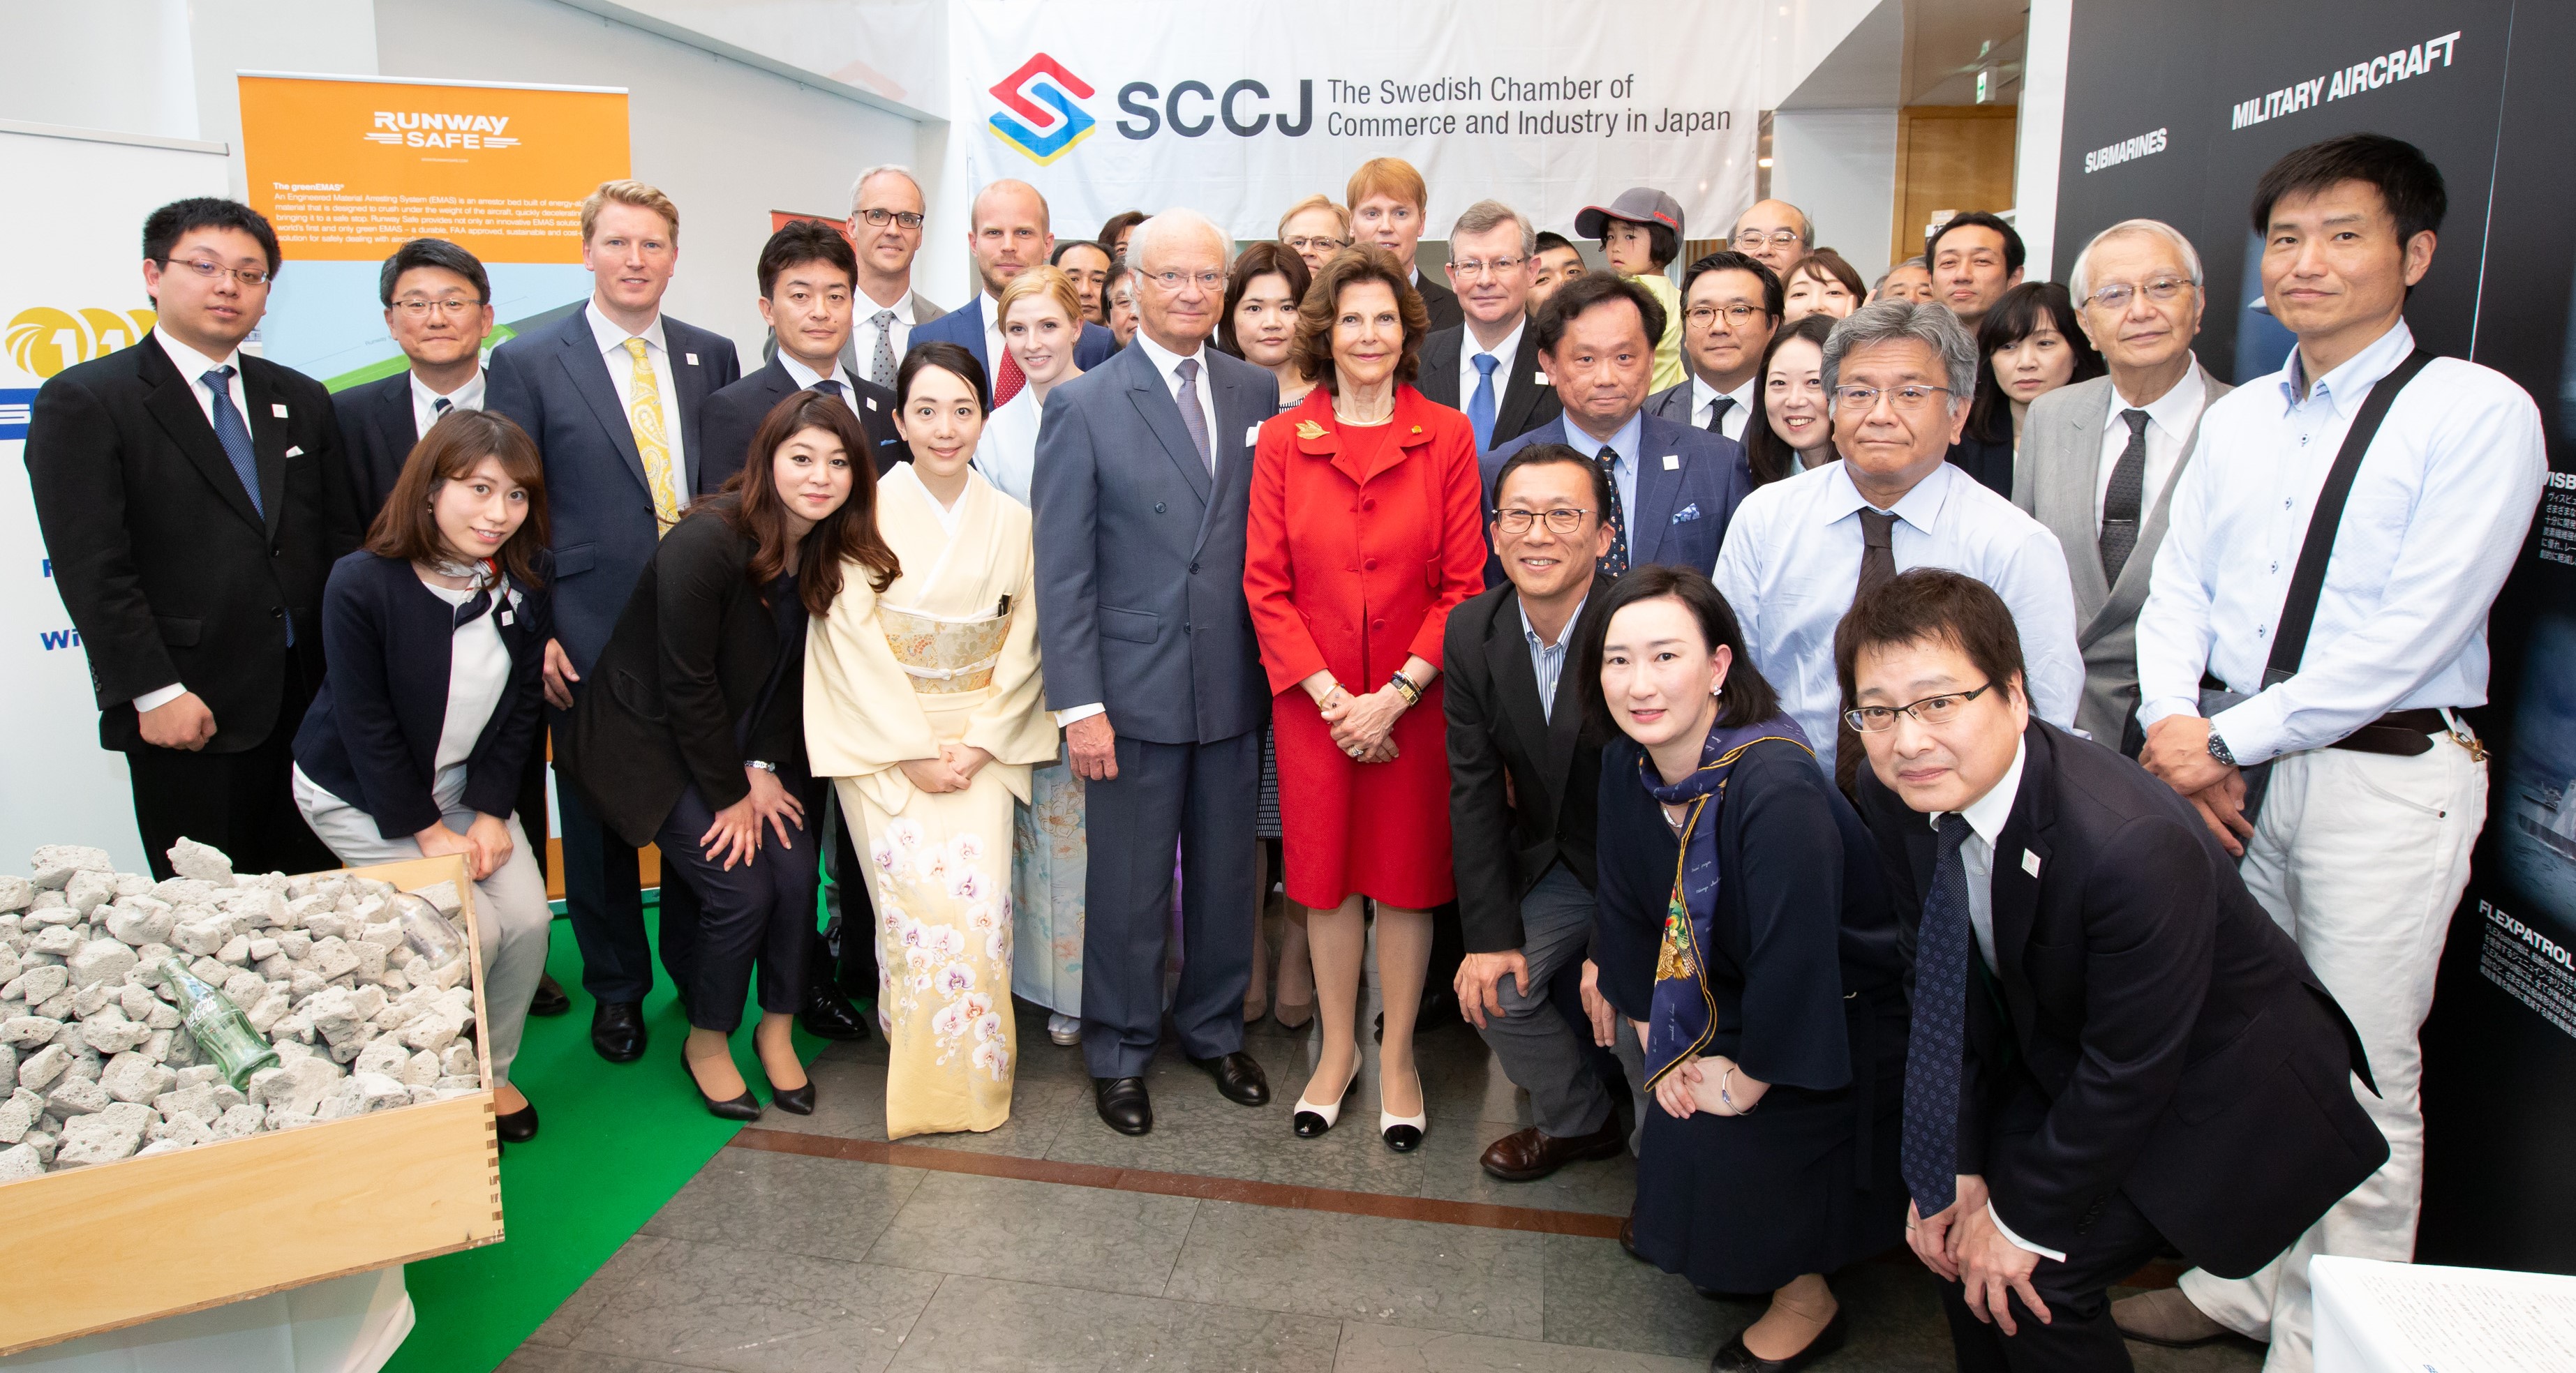 An image of The King & Queen of Sweden together with Members of SCCJ.